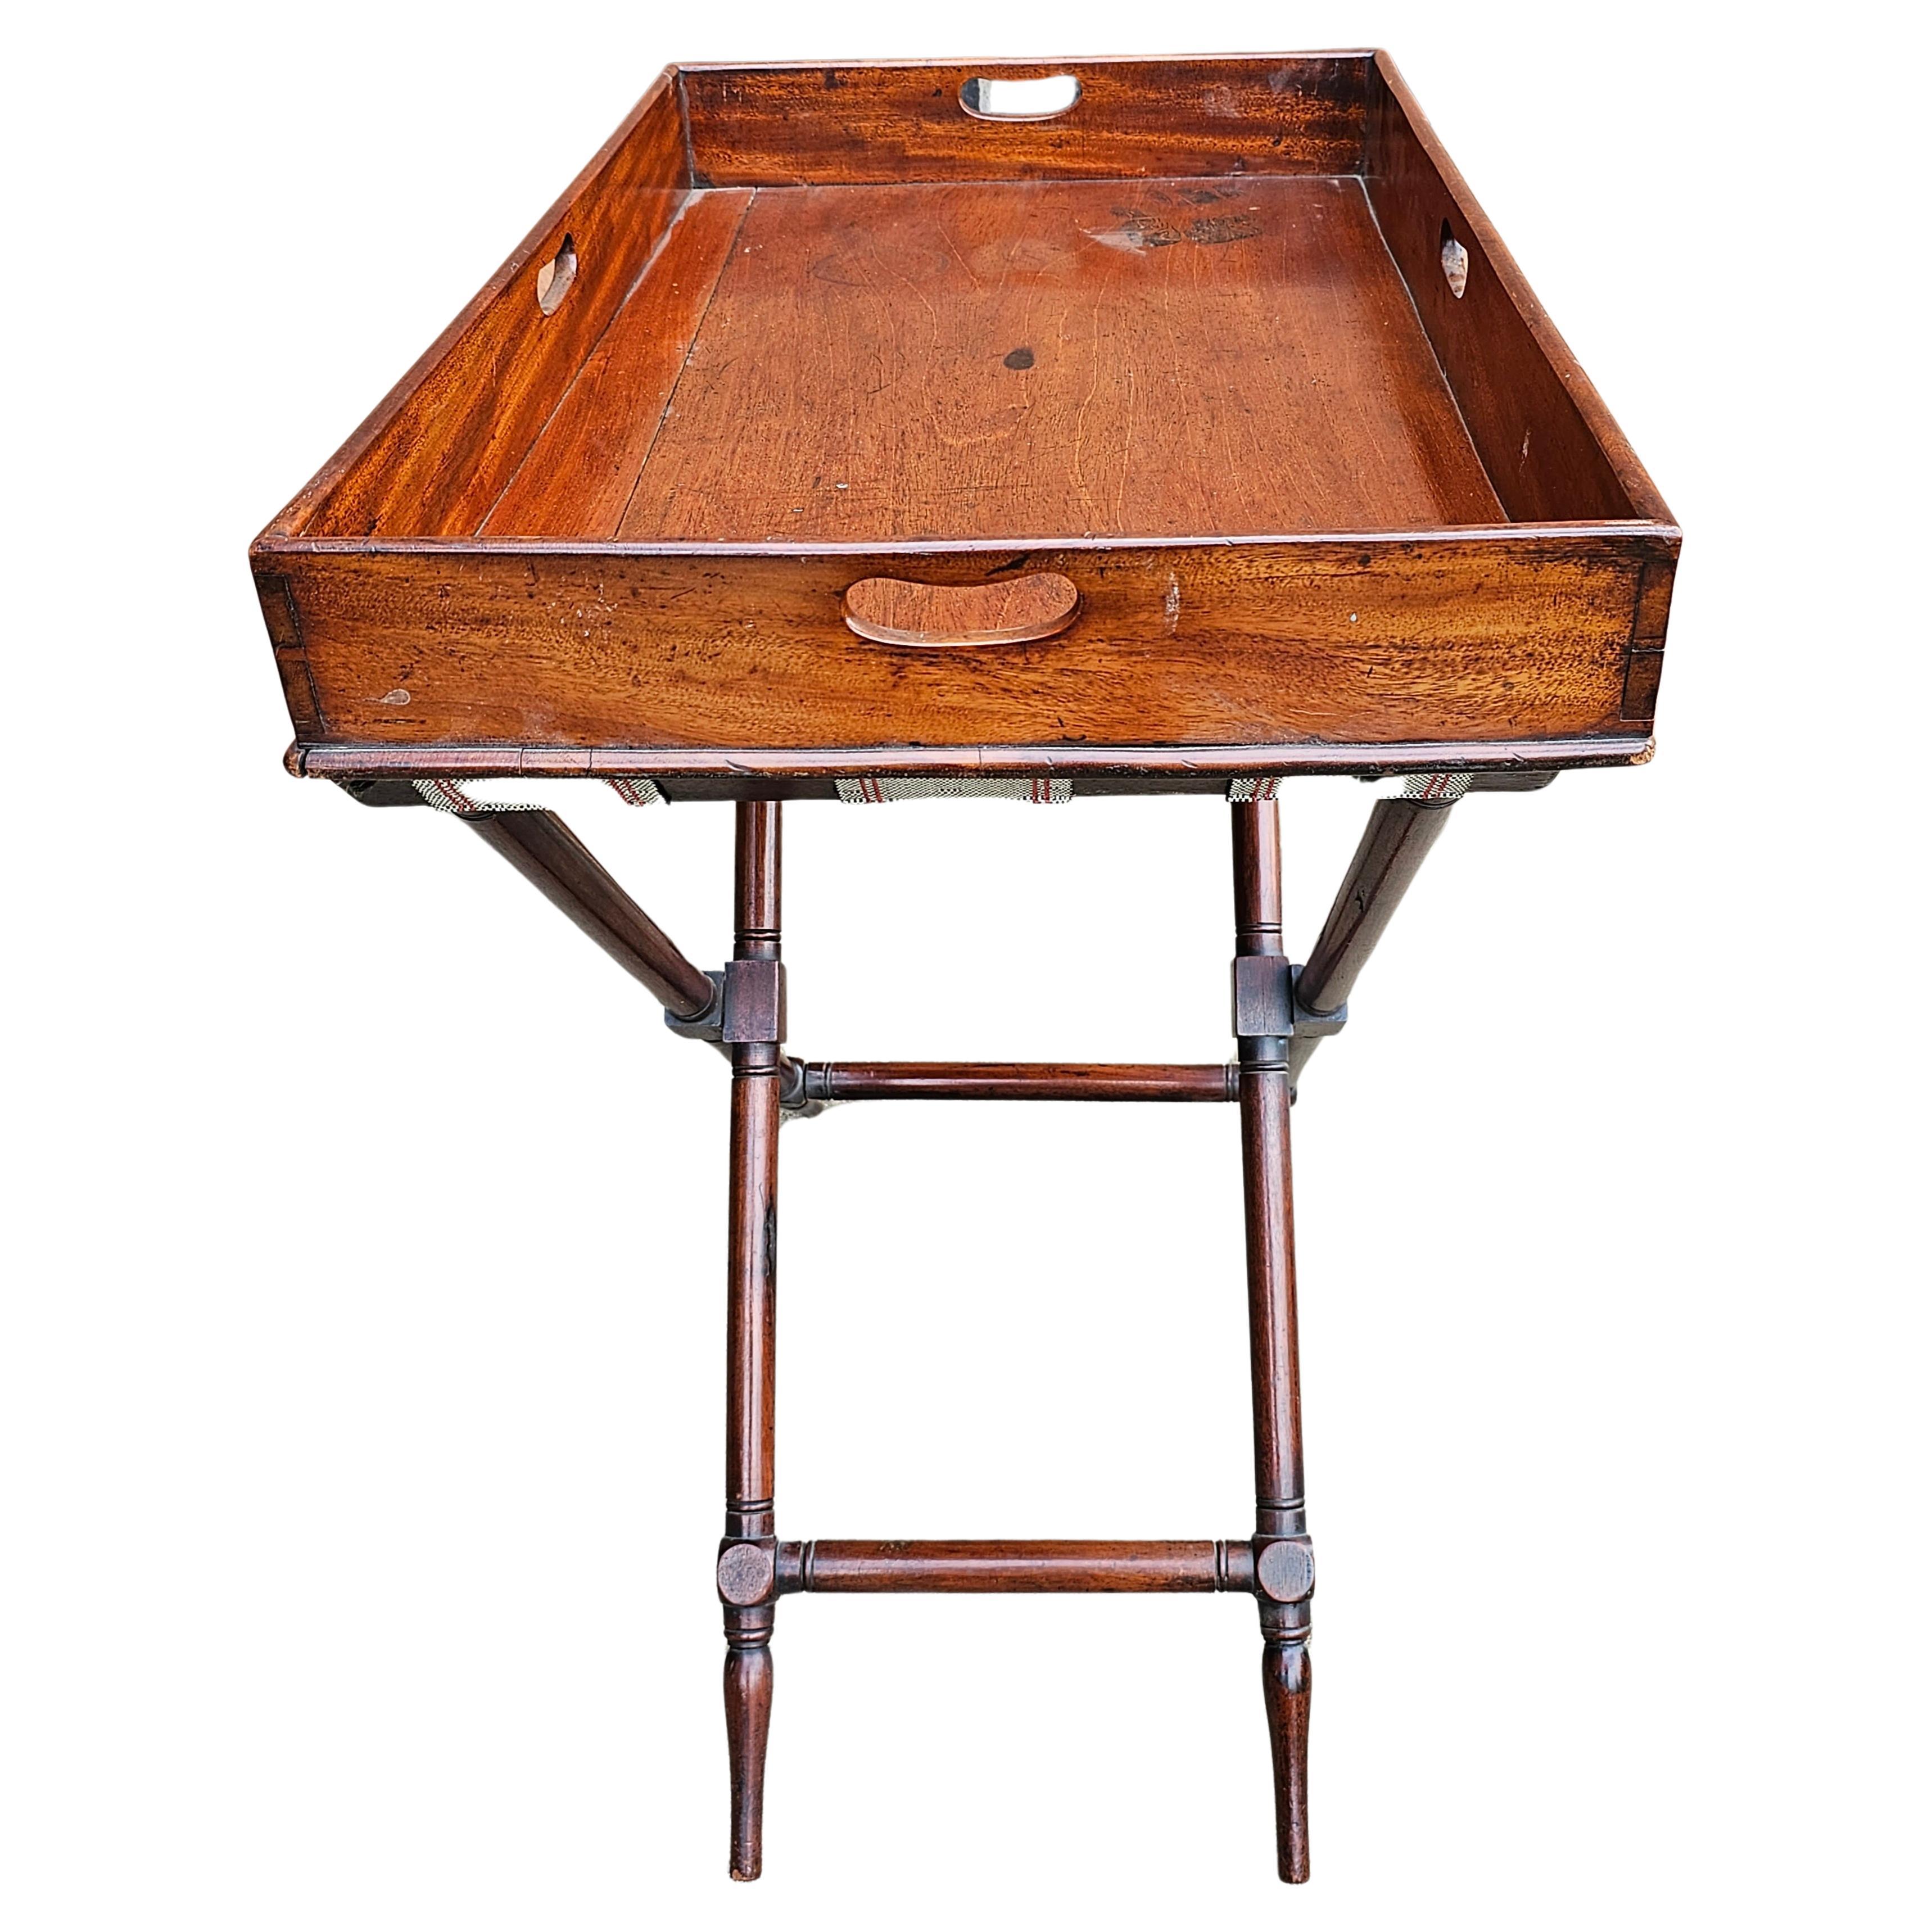 Anglo-Japanese 19th Century English Mahogany Butler's Tray Table For Sale